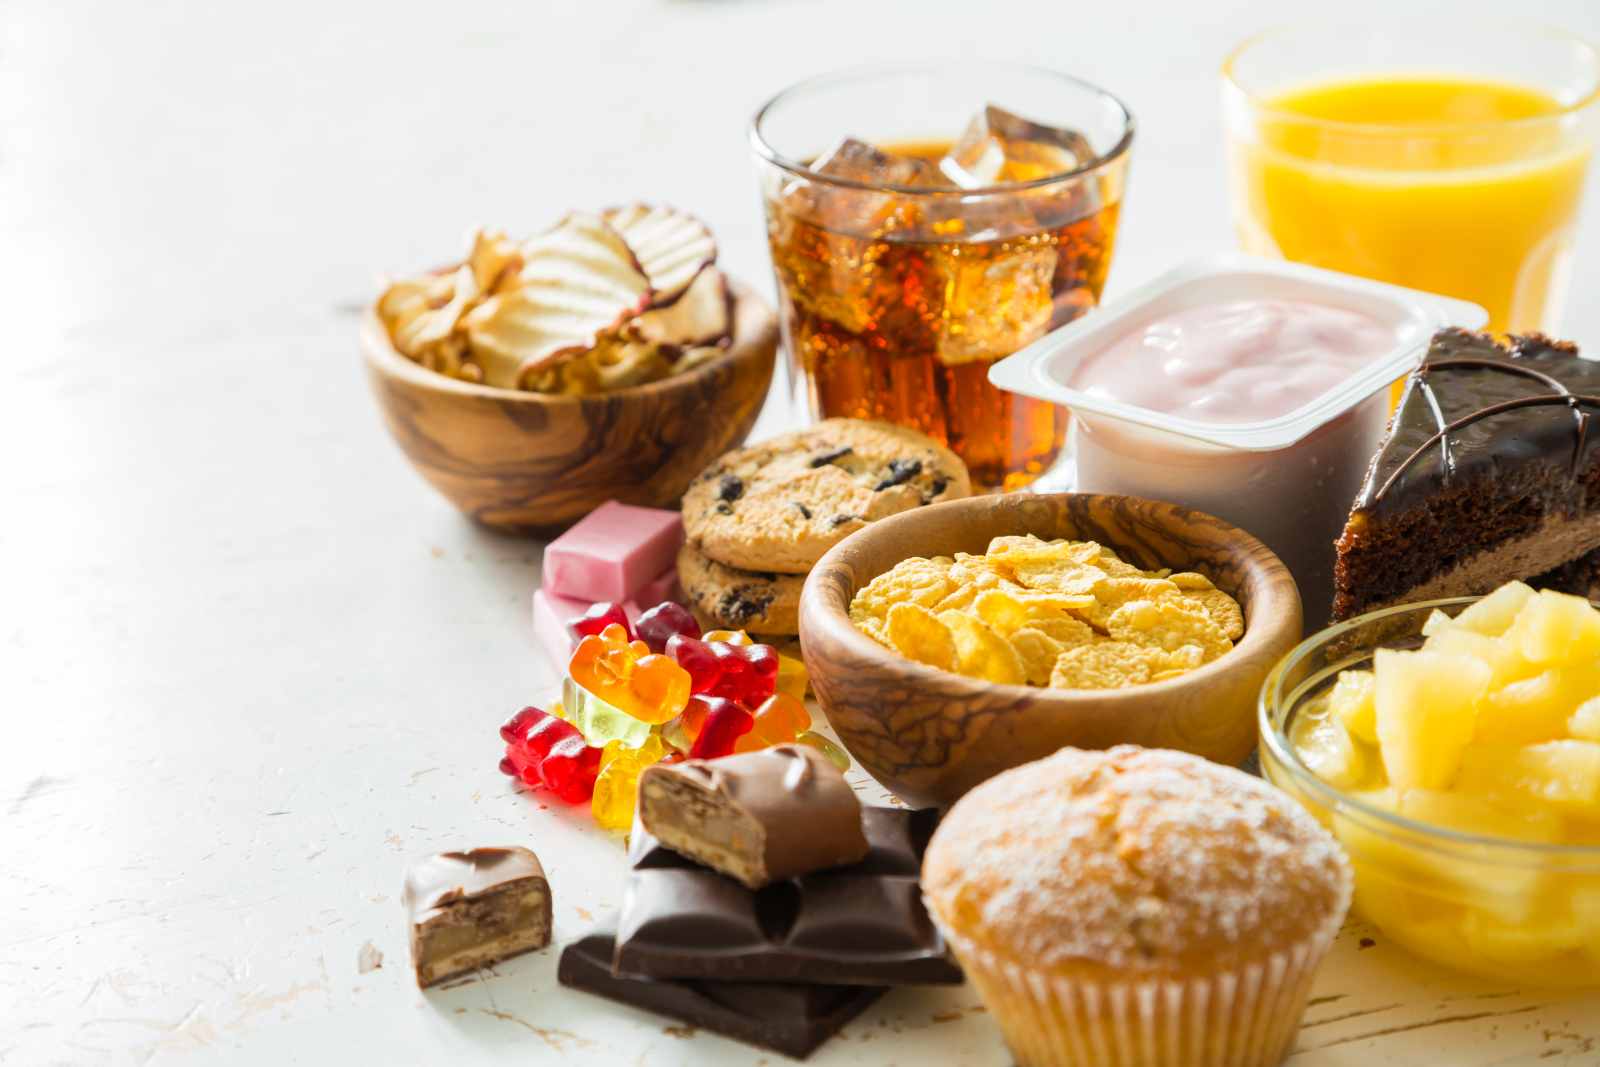 A selection of high sugar content food, which can cause cavities according to 21st Century Dental in Nashville, TN